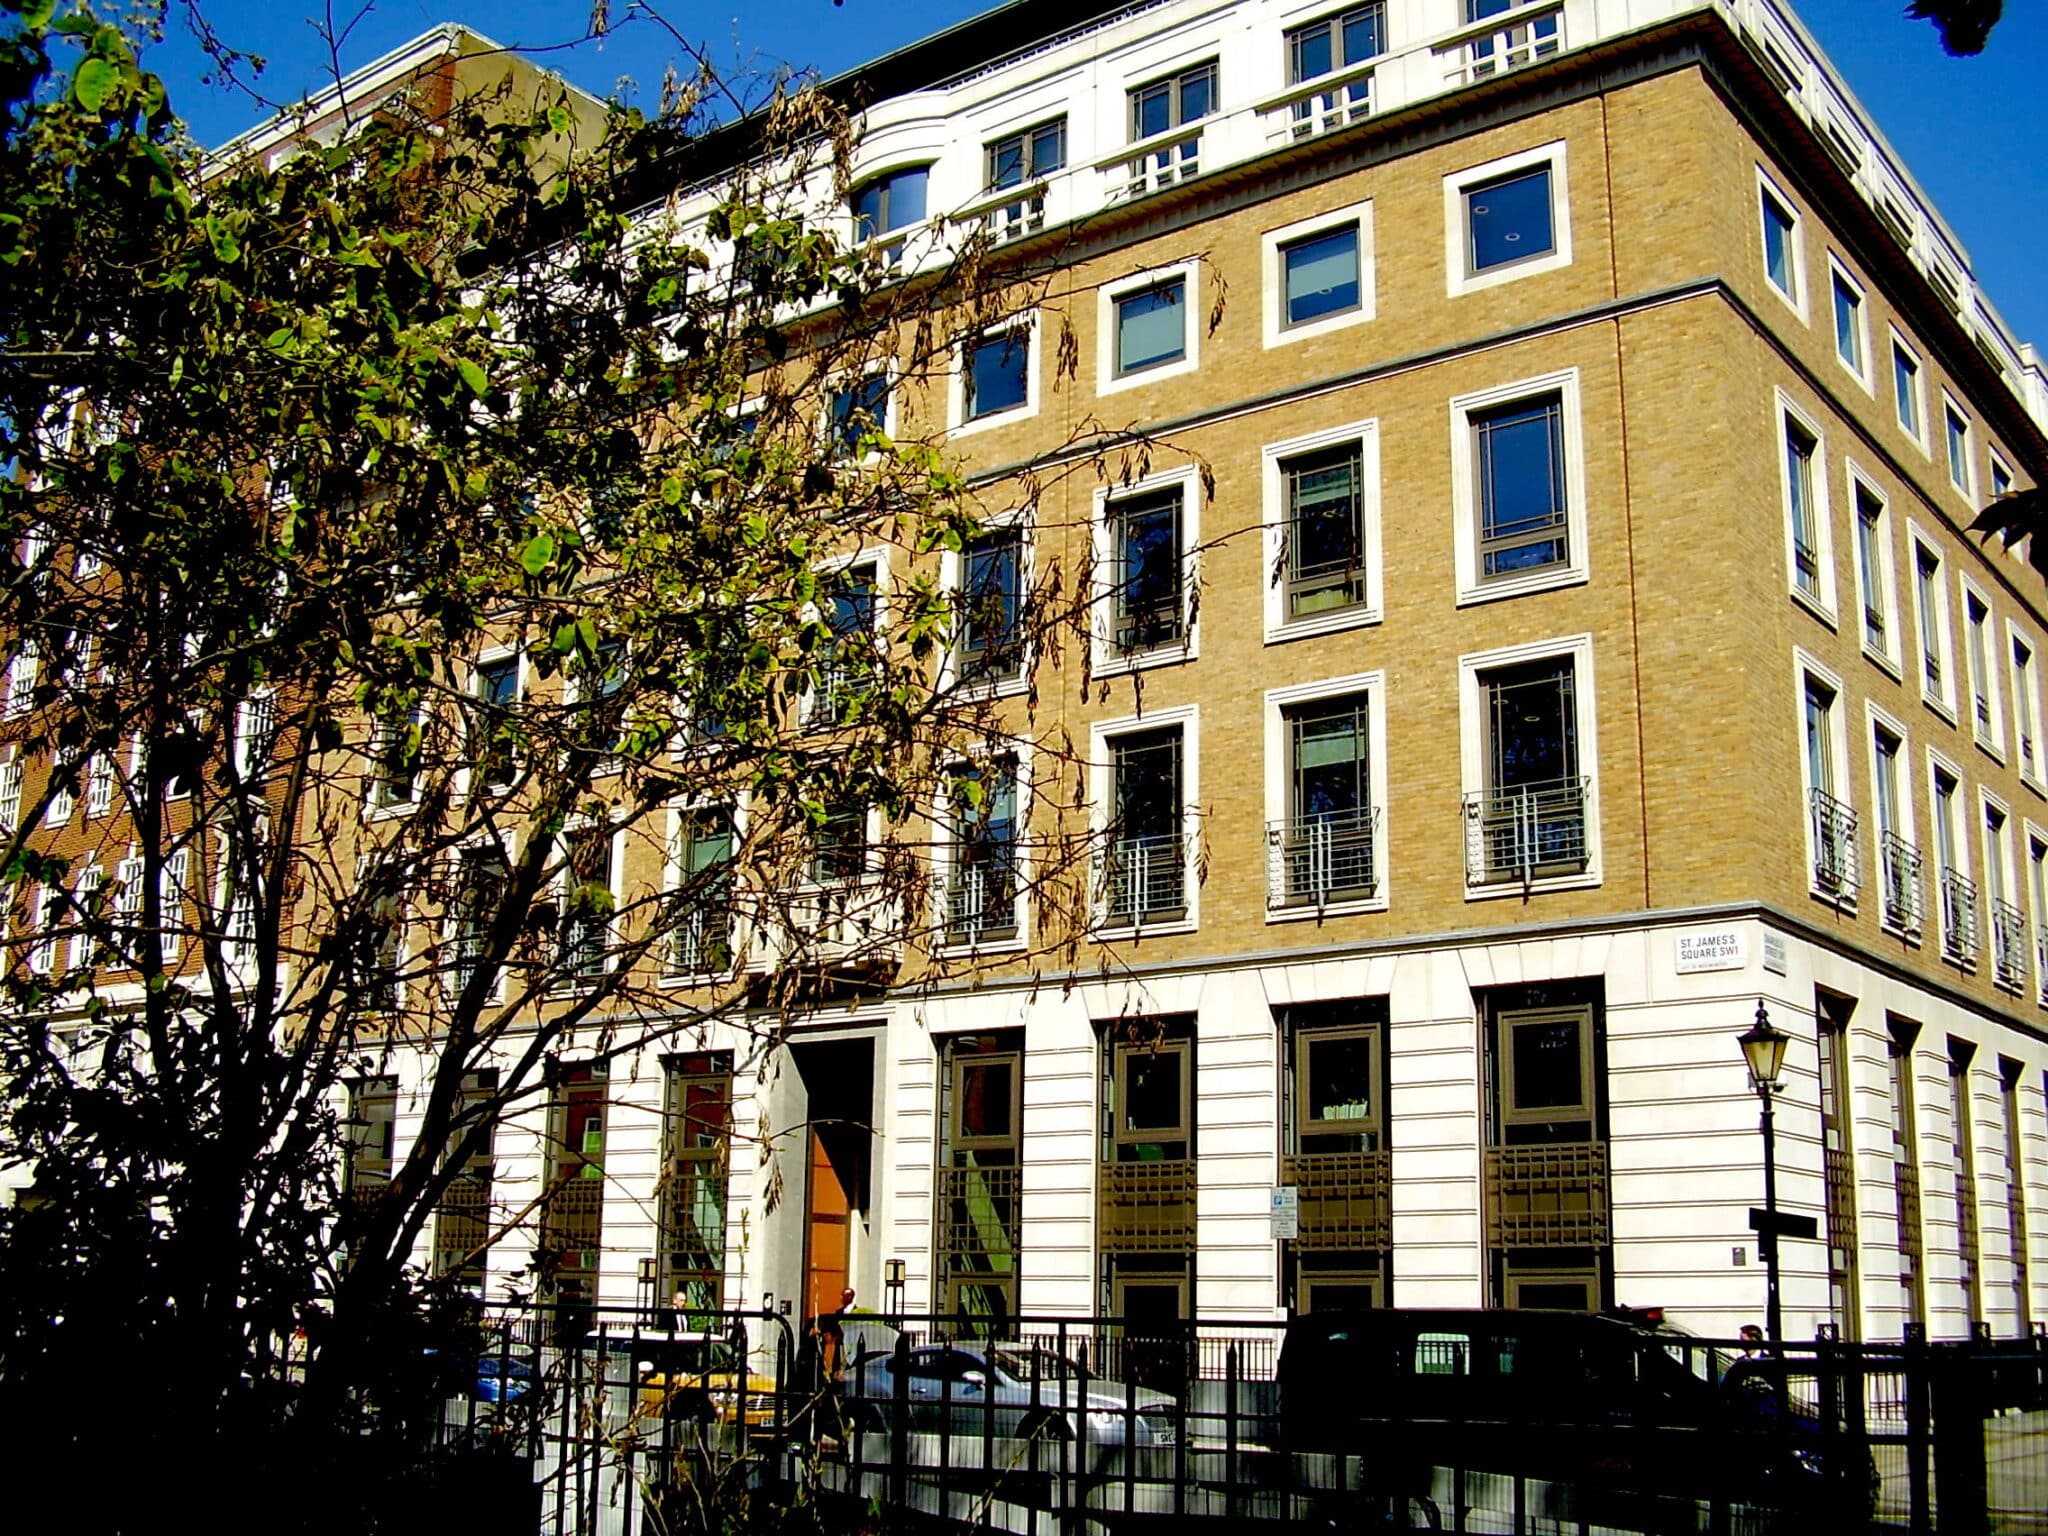 The head office of BP in London. Photo: Public domain, Wikimedia Commons.